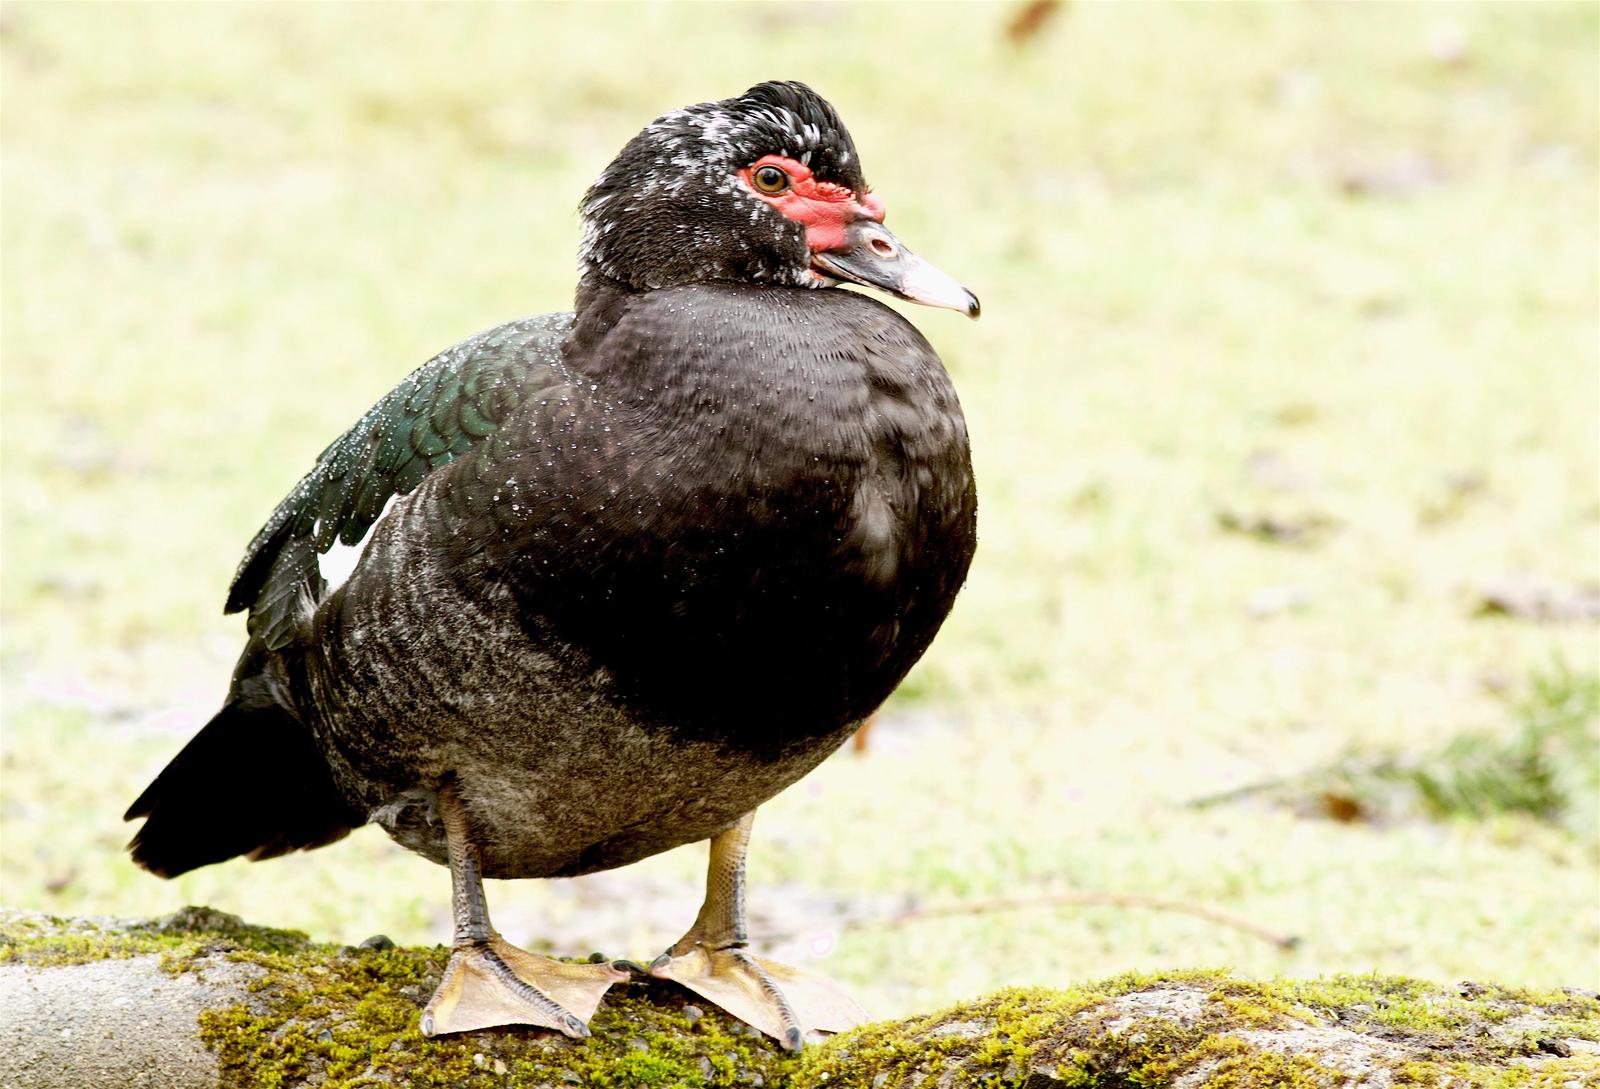 Muscovy Duck (Domestic type) Photo by Kathryn Keith